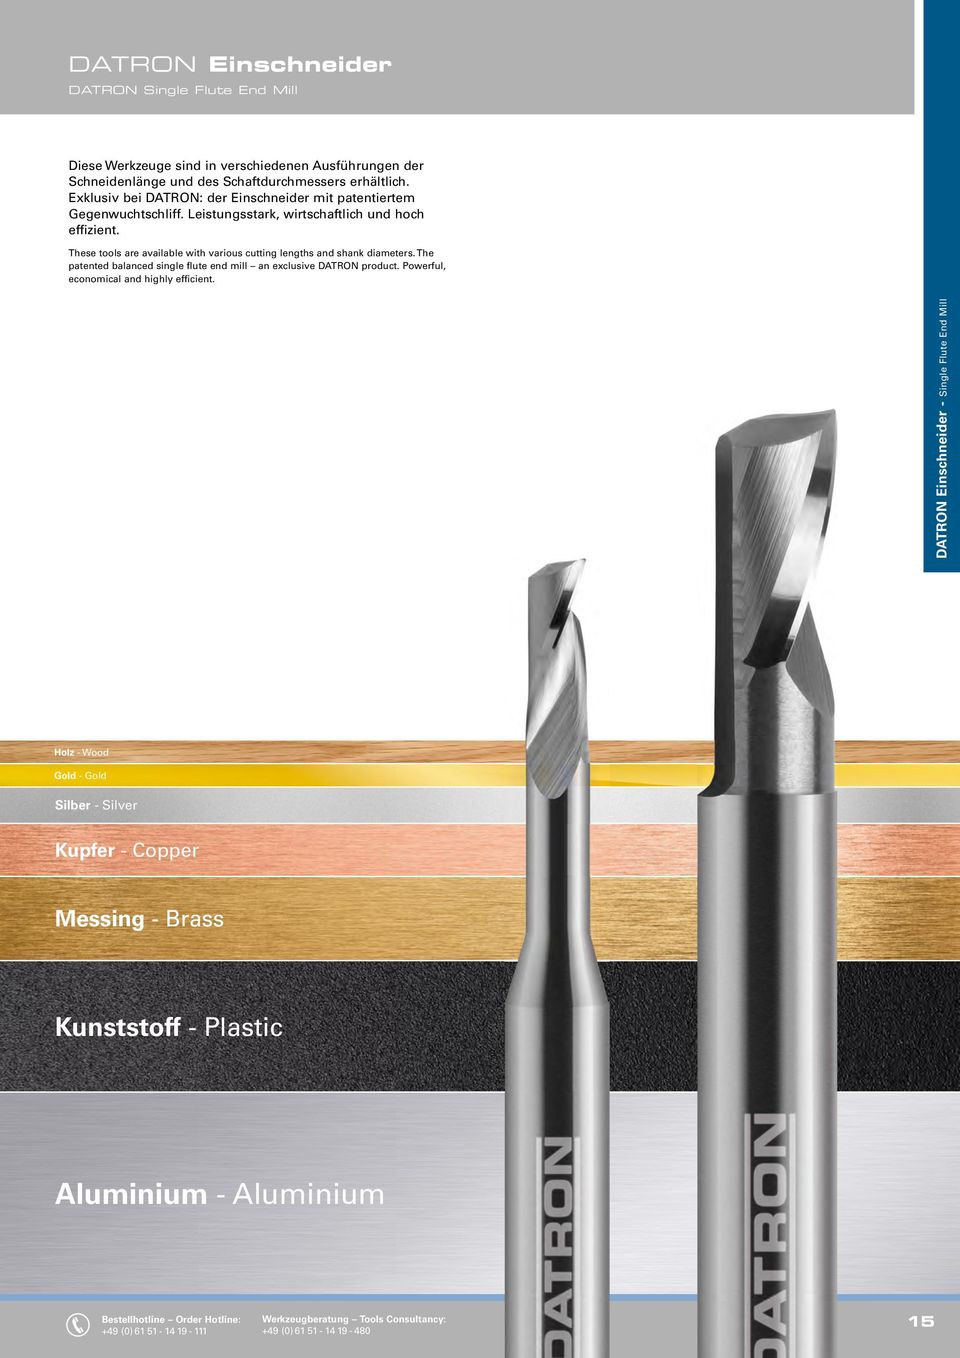 These tools are available with various cutting lengths and shank diameters. The patented balanced single flute end mill an exclusive DATRON product.